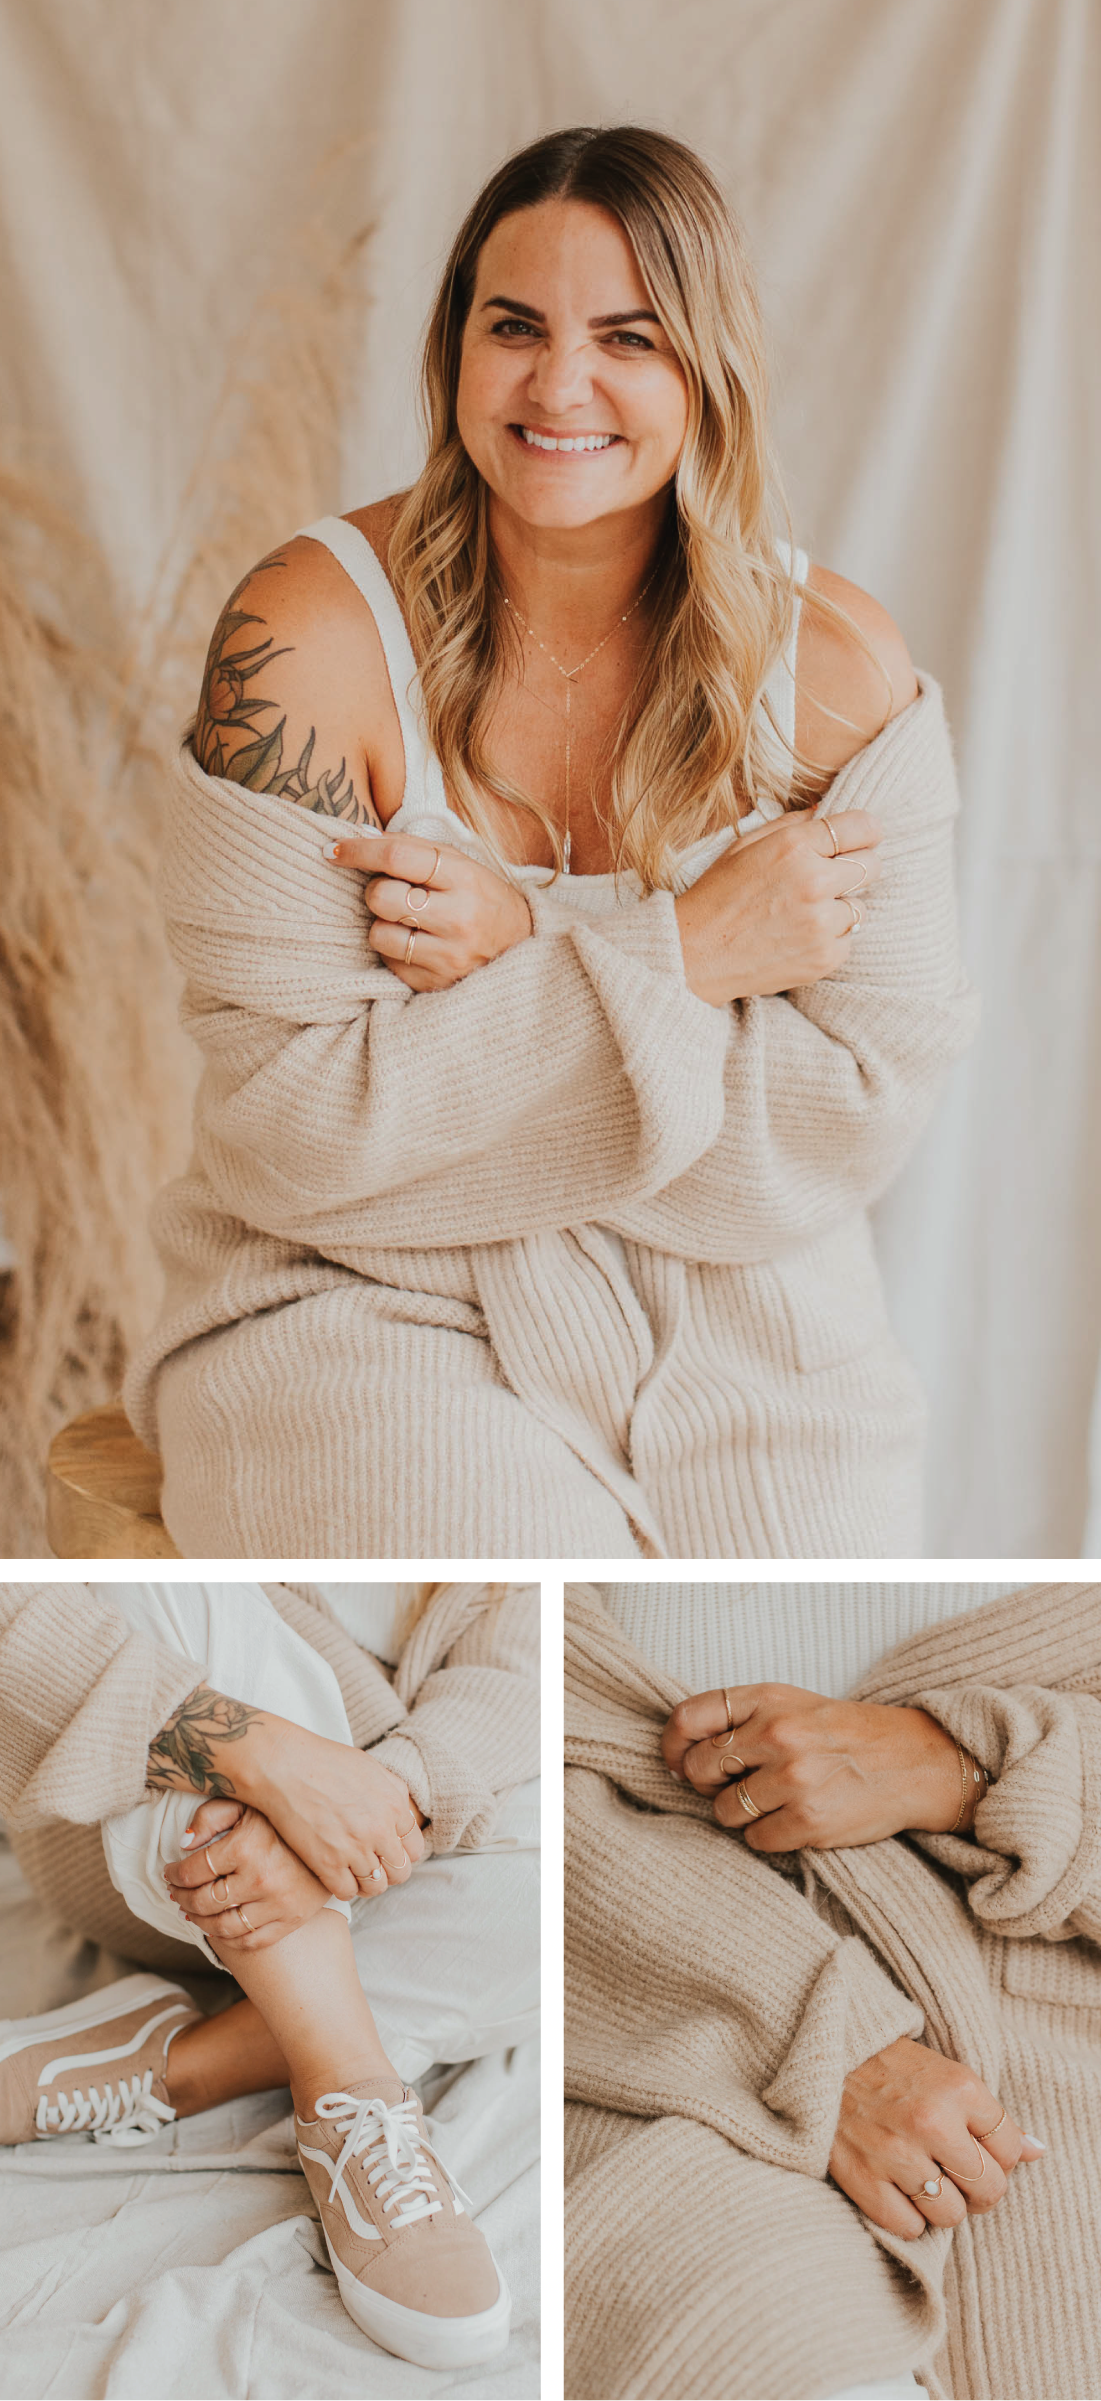 Jess layers neutral whites and tans for the perfect comfy, cozy and effortless look.